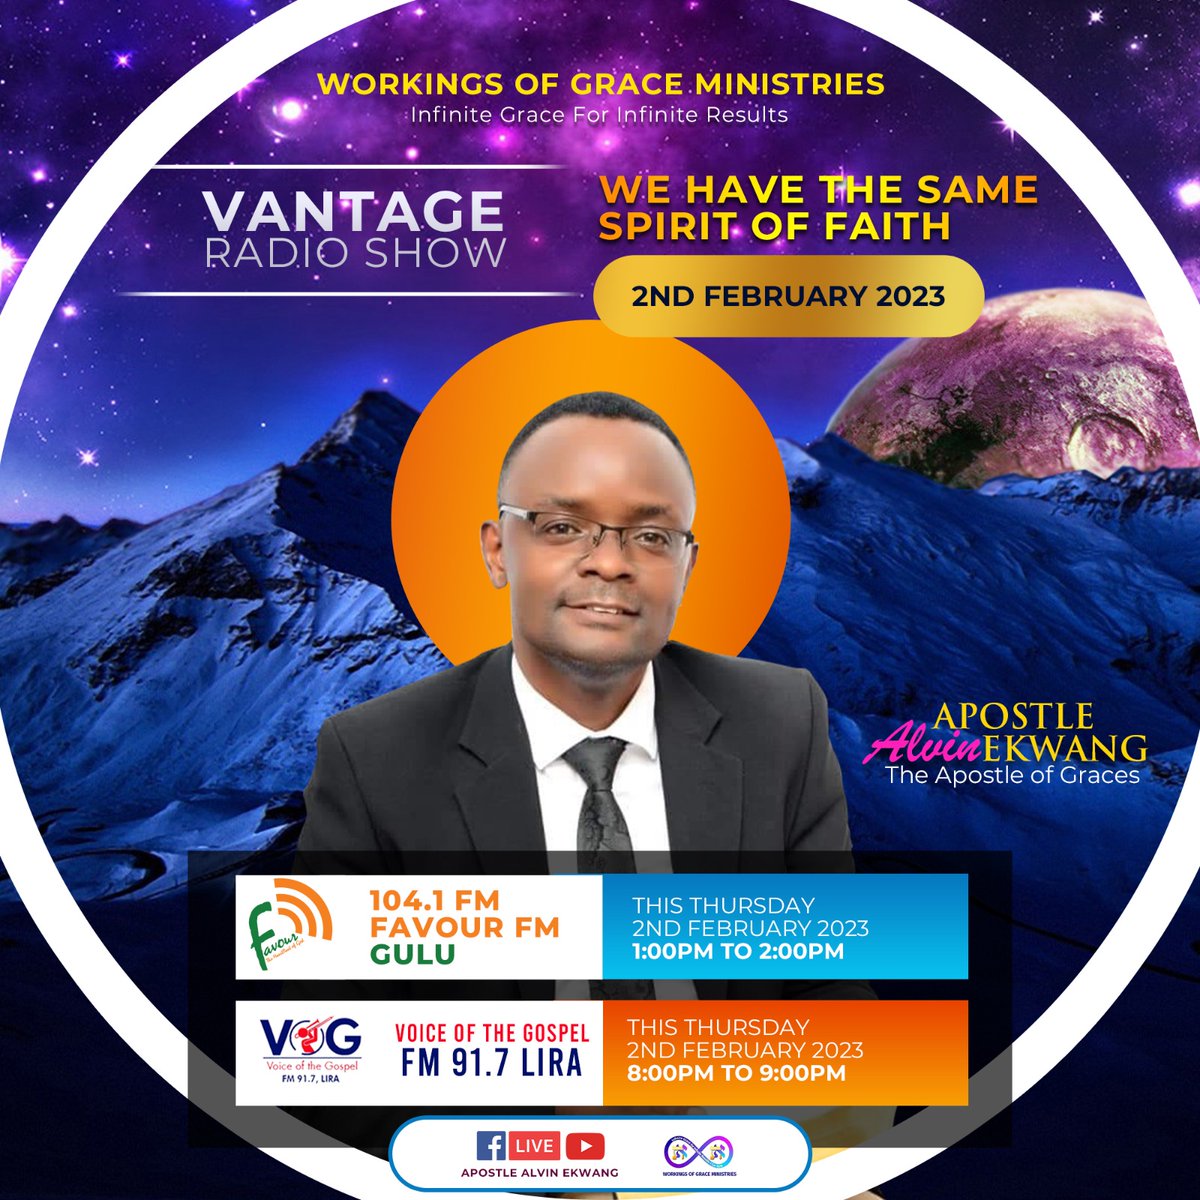 This Thursday 2nd February 2023 #GuluCity 1pm to 2pm and #LiraCity 8pm to 9pm  #VantageRadioShow with #ApostleAlvinEkwang Don't miss. Tune in and Be blessed.